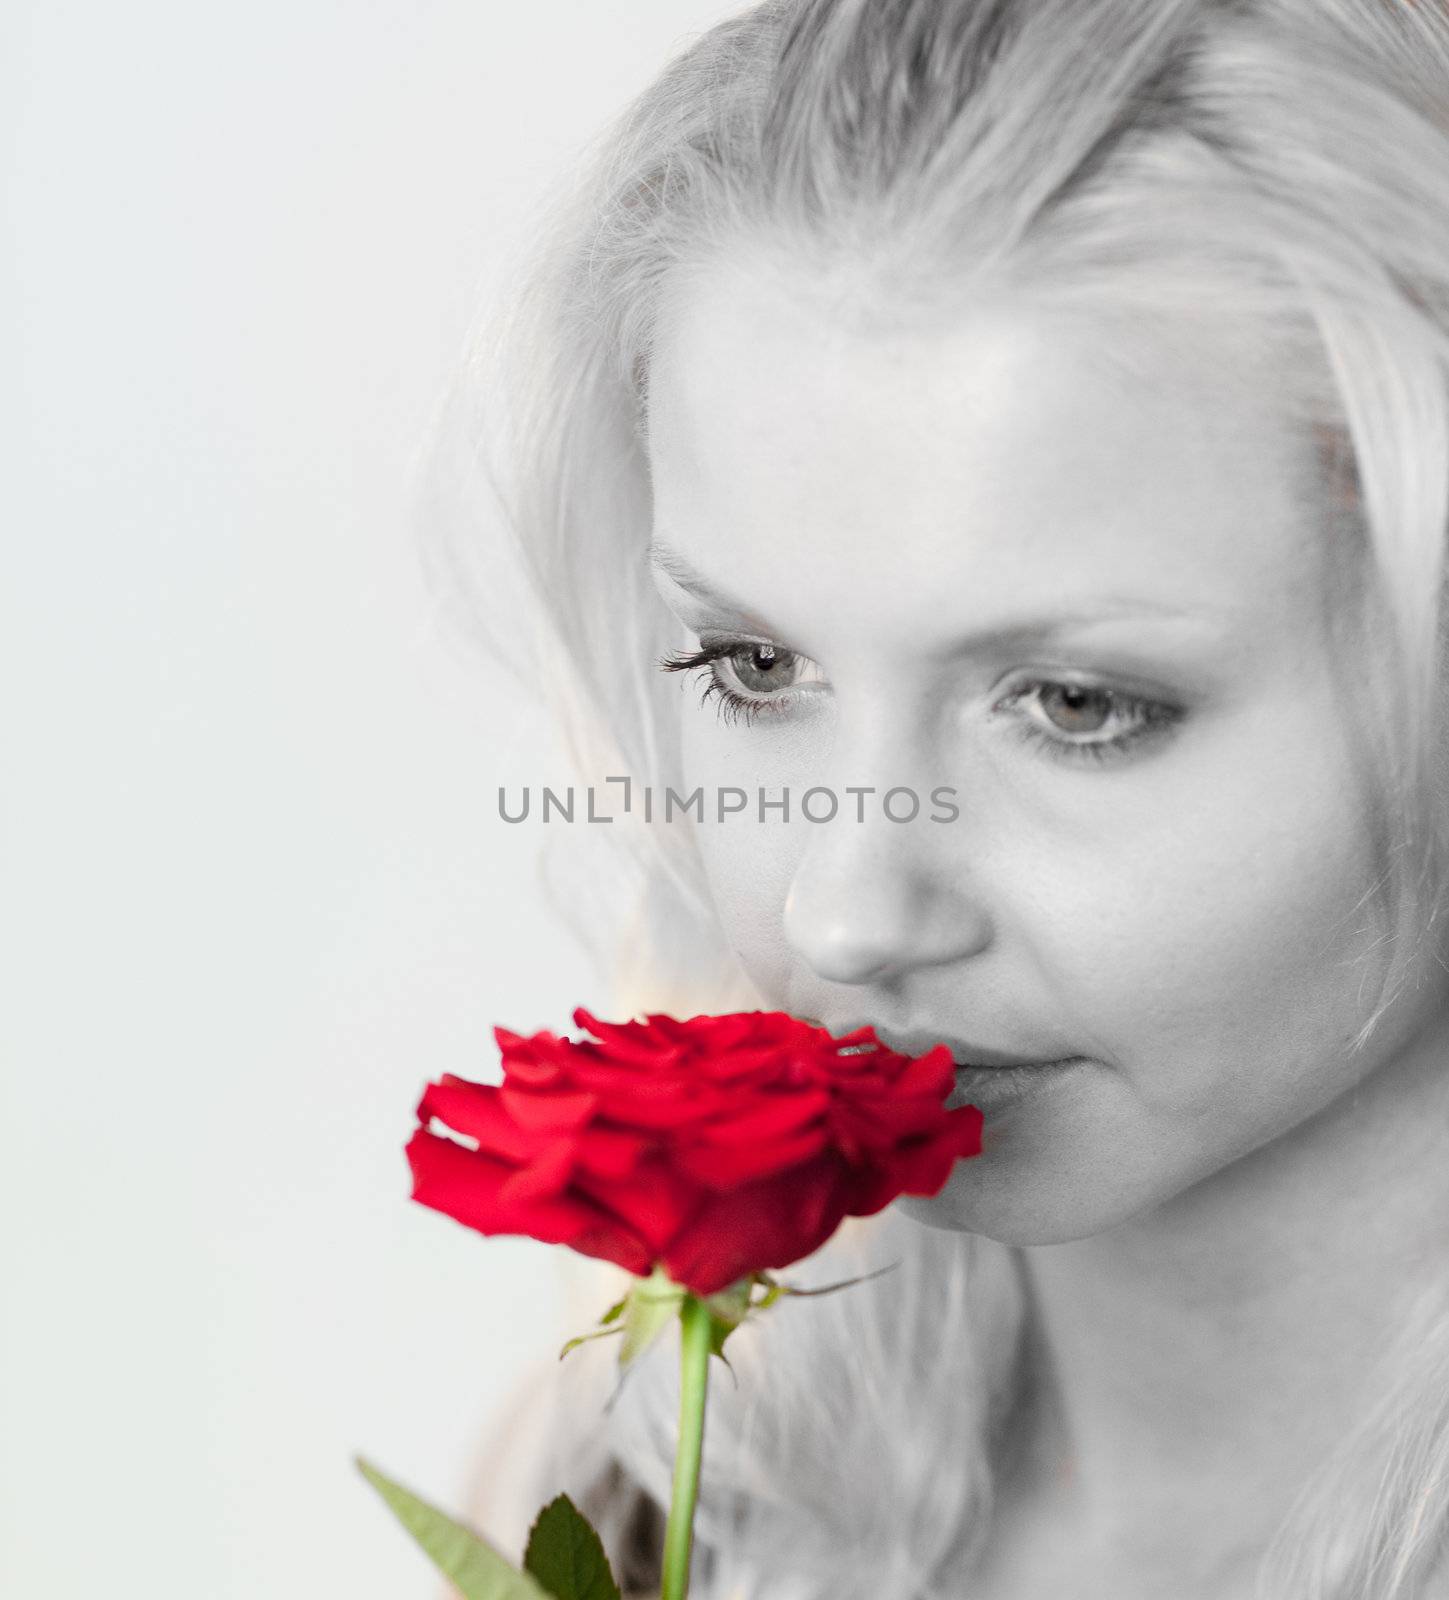 Portrait of an beautiful woman in black and white smelling a red rose 